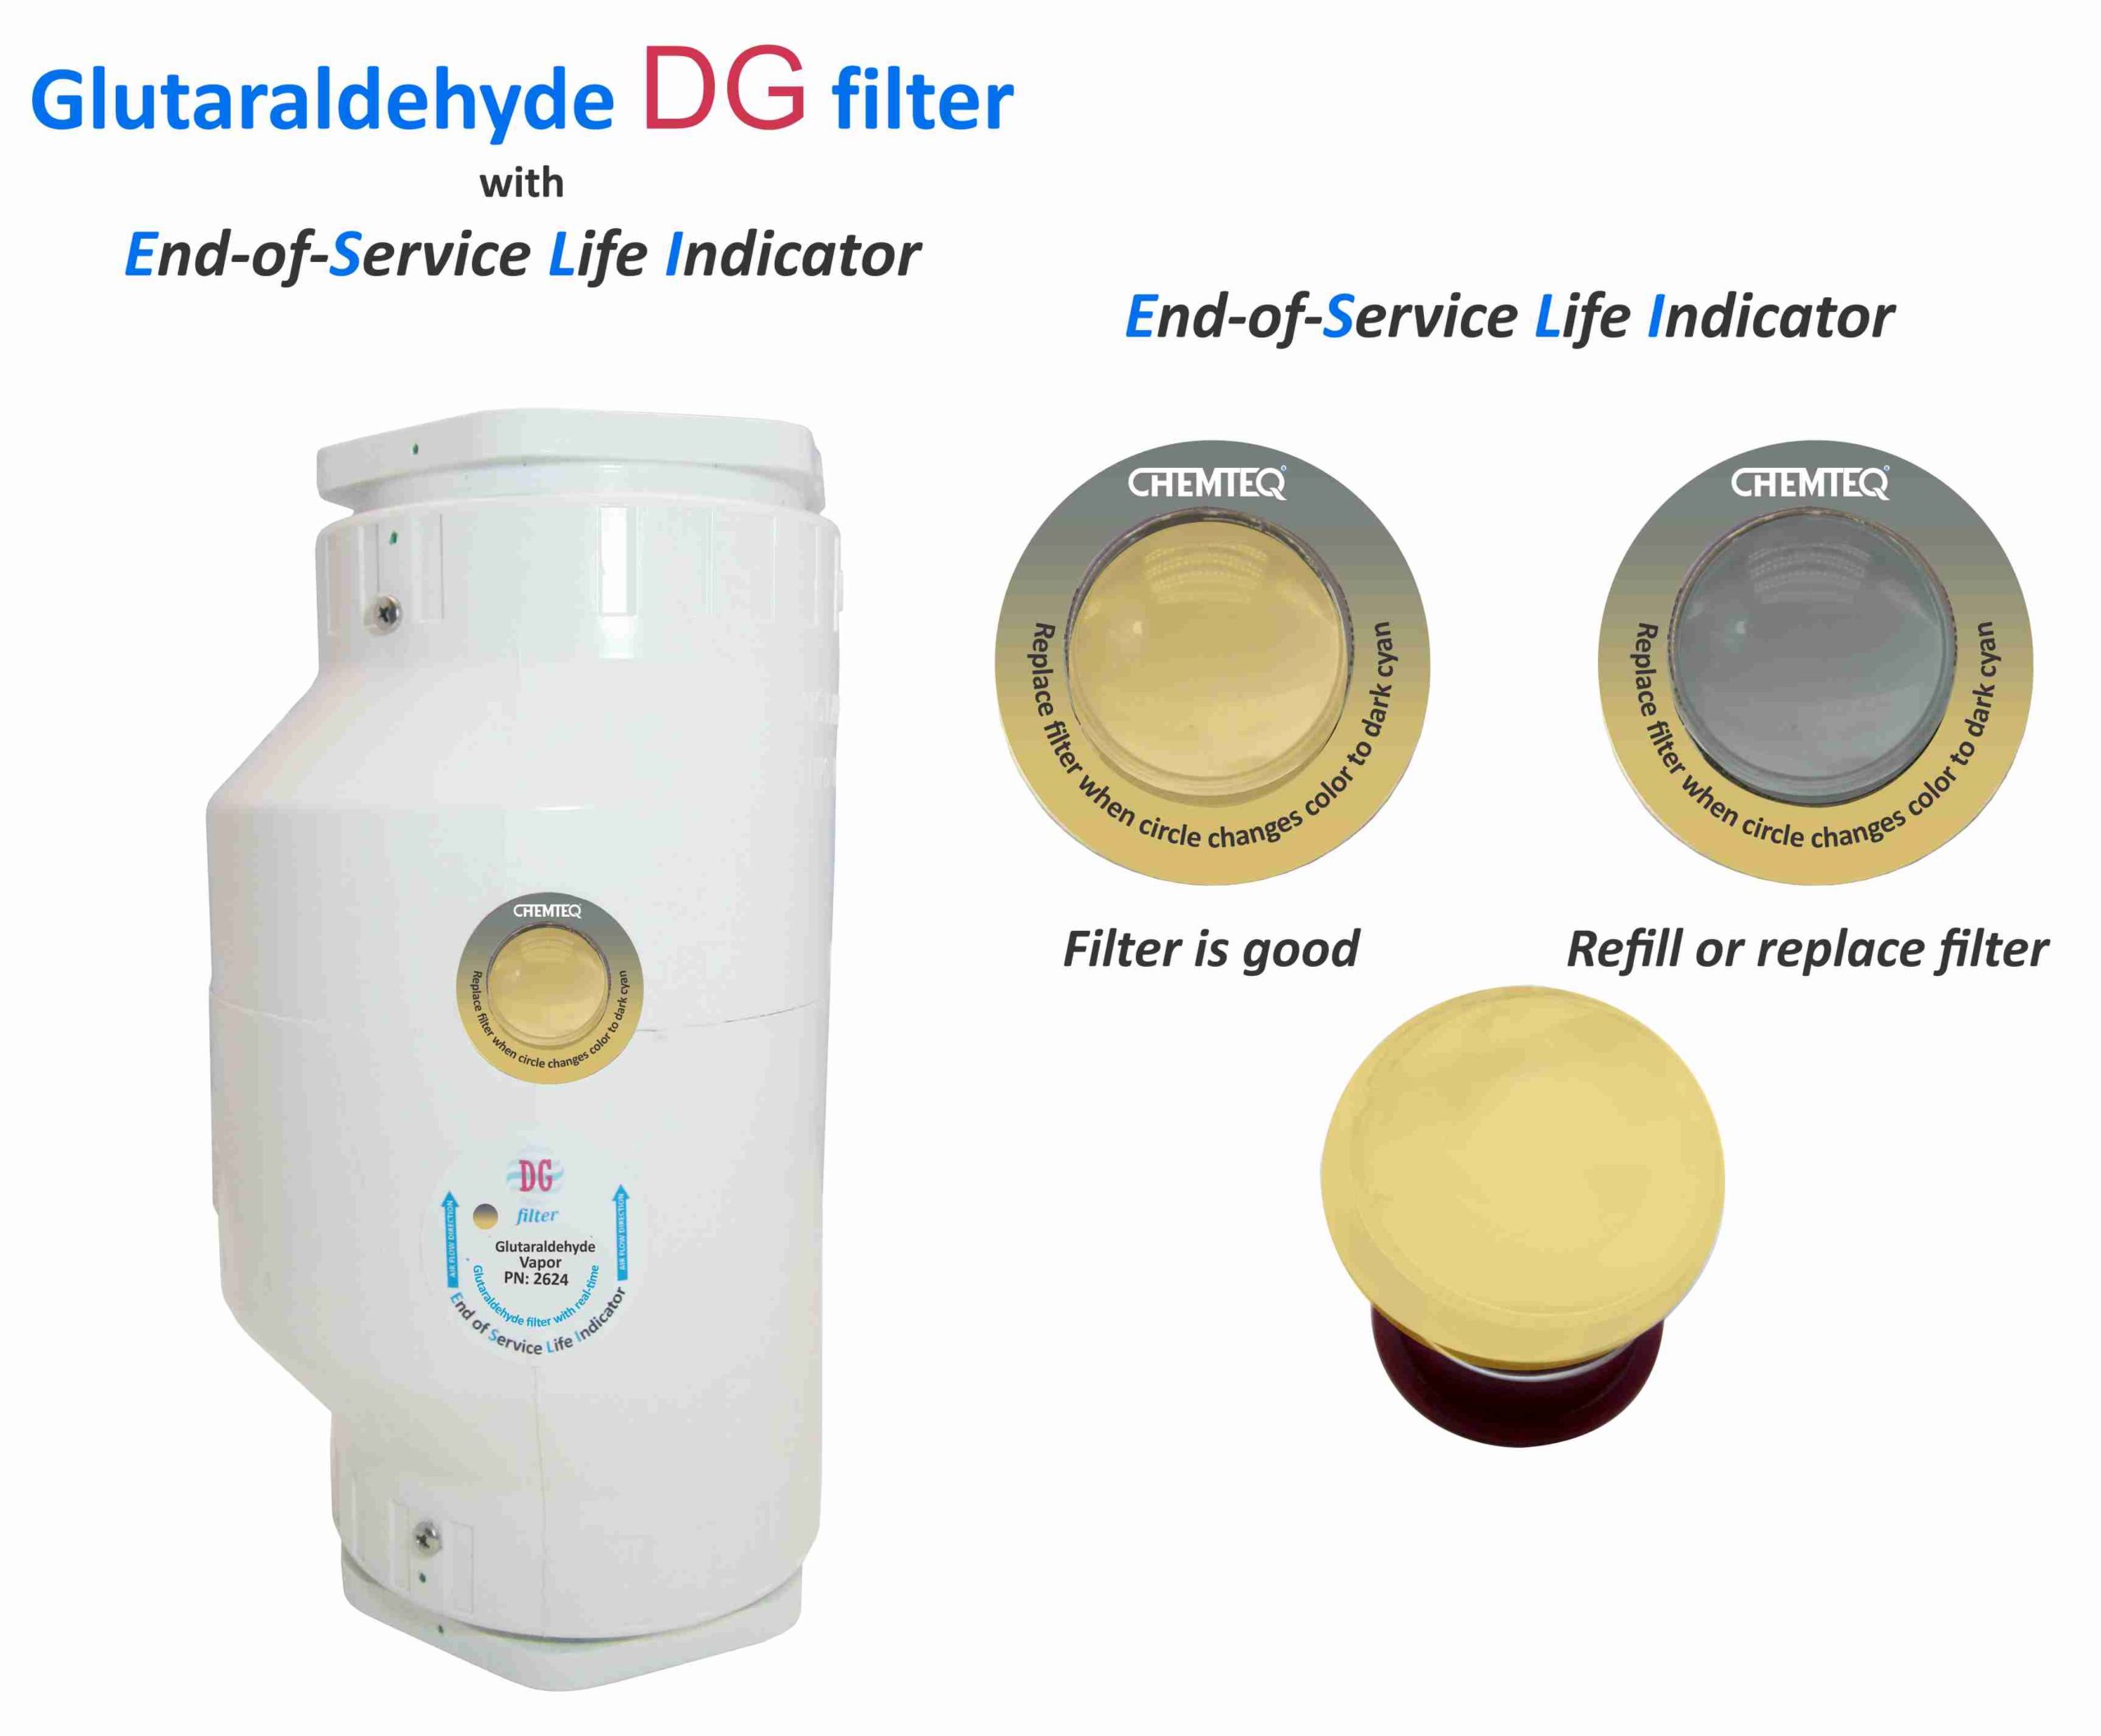 Glutaraldehyde DG FILTER-ESLI-2627. Filter with end of service life indicator for chemical processes and reactor vents.